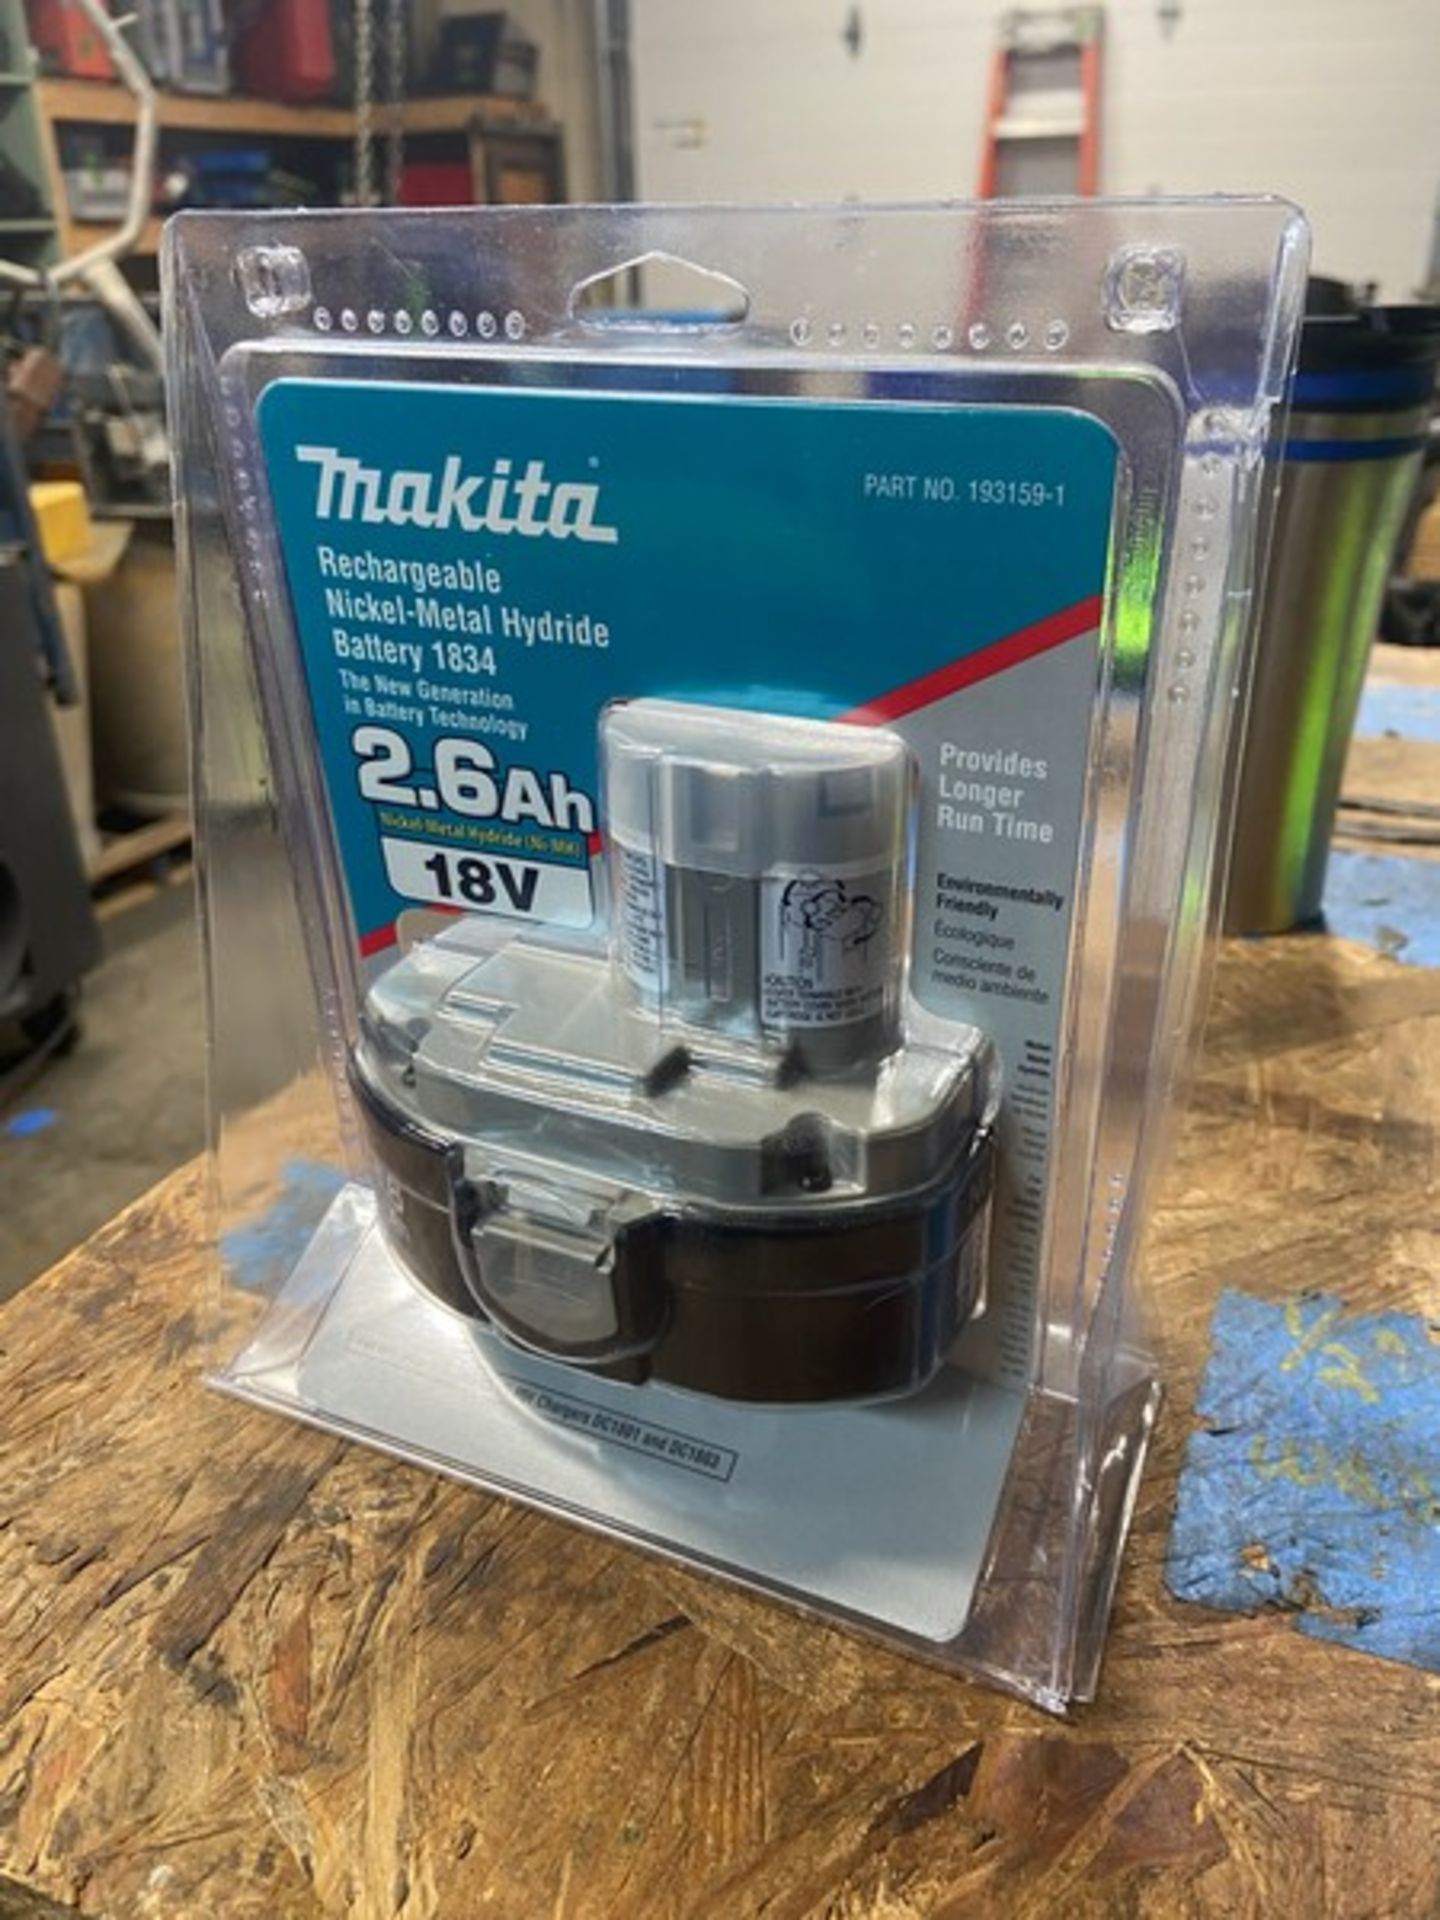 NEW Makita Regardeable Nickel-Metal Hydride Battery 1834, 18 Volts (LOCATED IN MONROEVILLE, PA) - Image 5 of 6